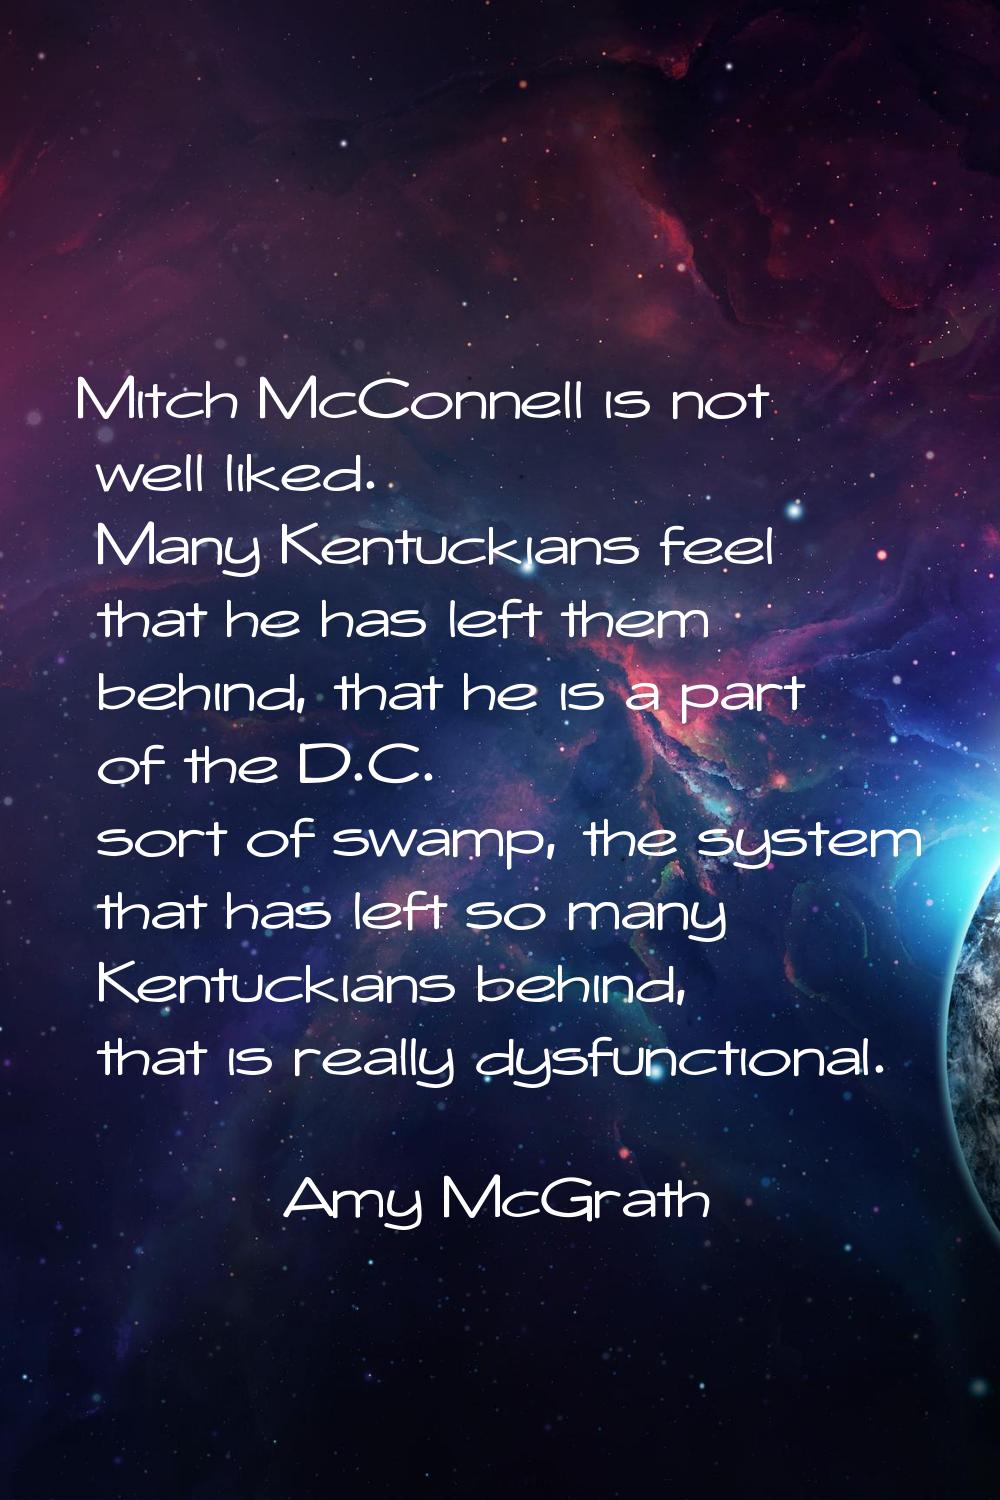 Mitch McConnell is not well liked. Many Kentuckians feel that he has left them behind, that he is a